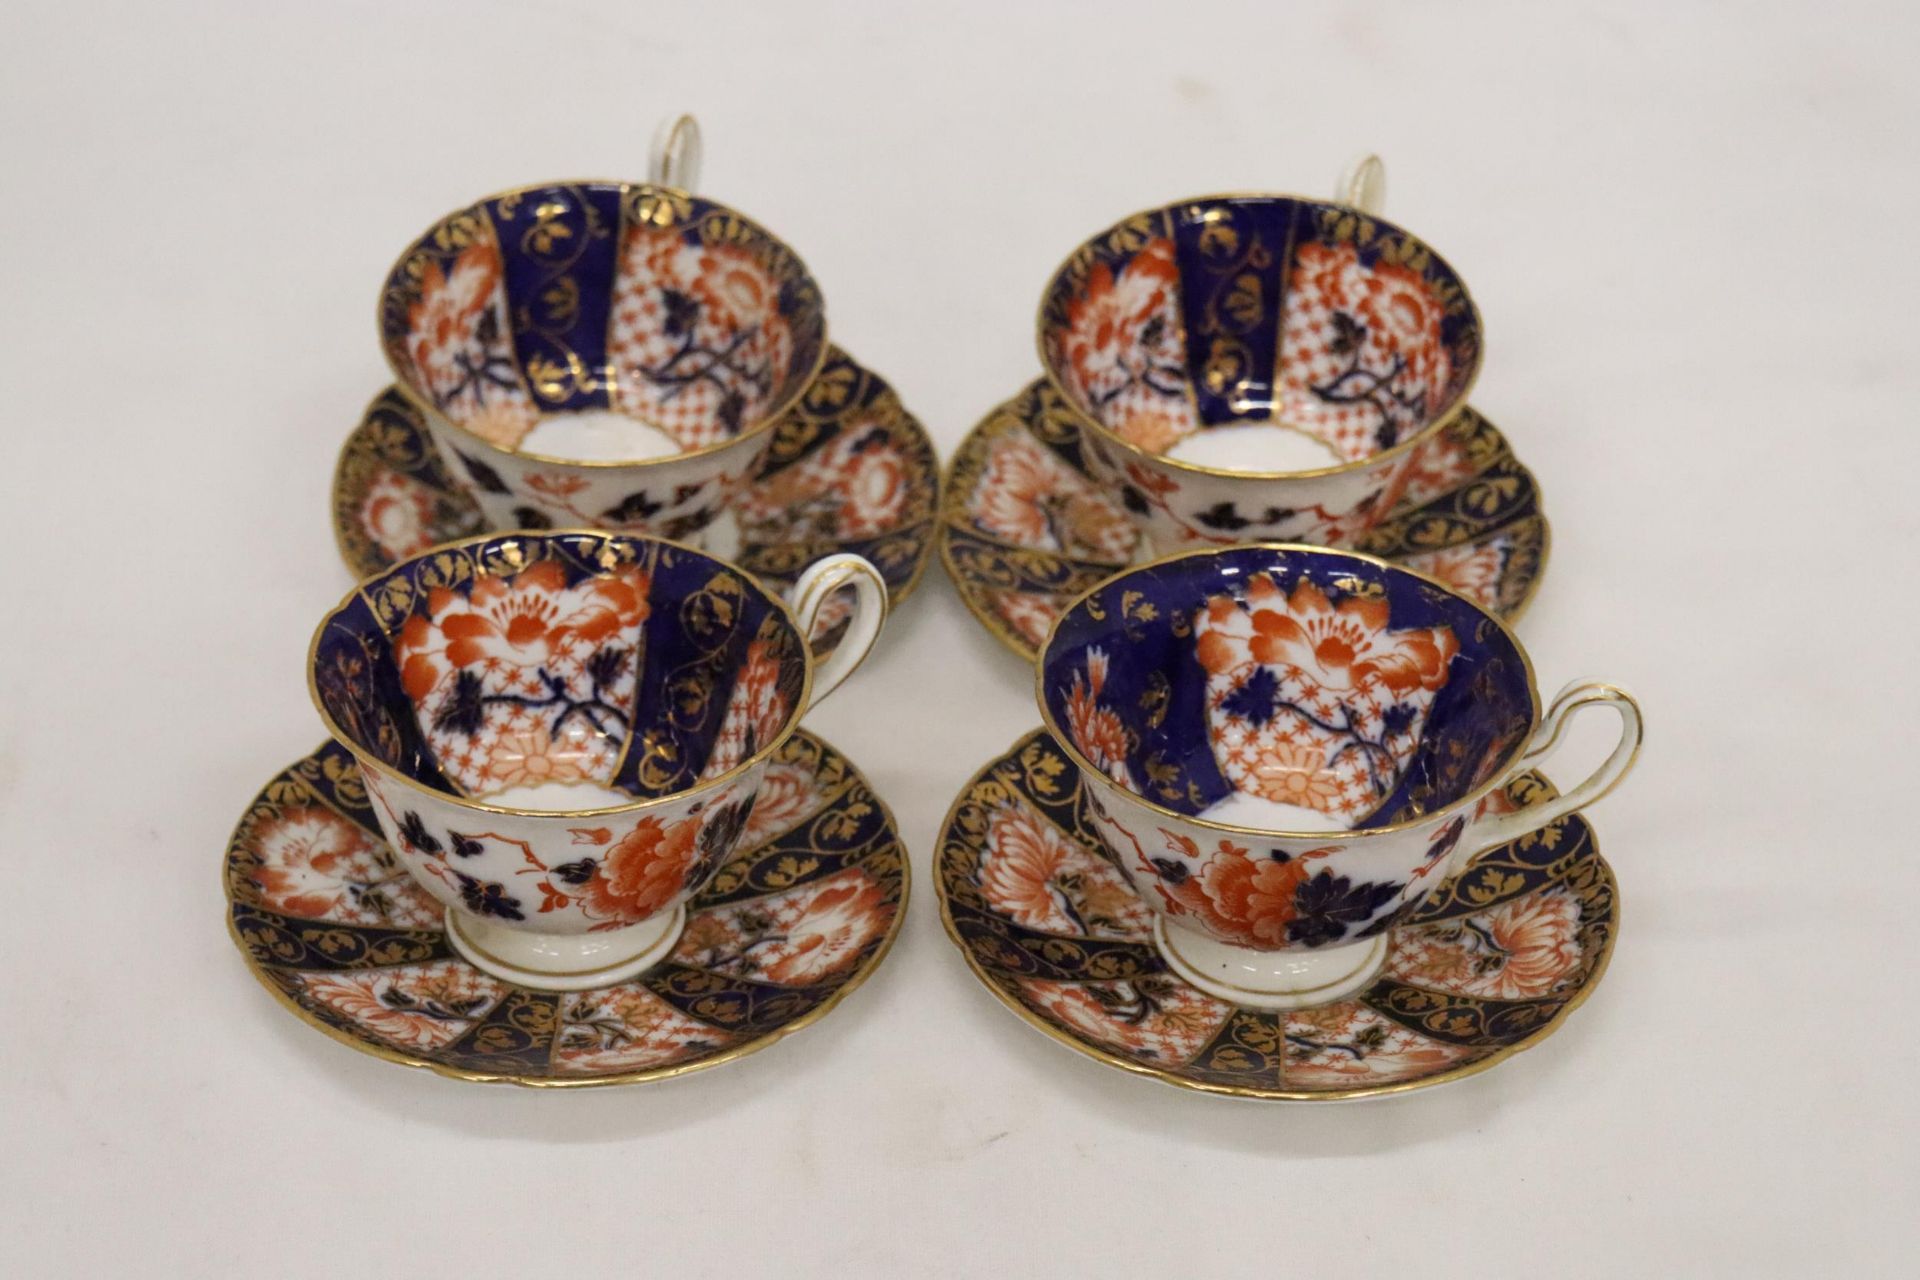 FOUR VINTAGE SHELLEY CUPS AND SAUCERS